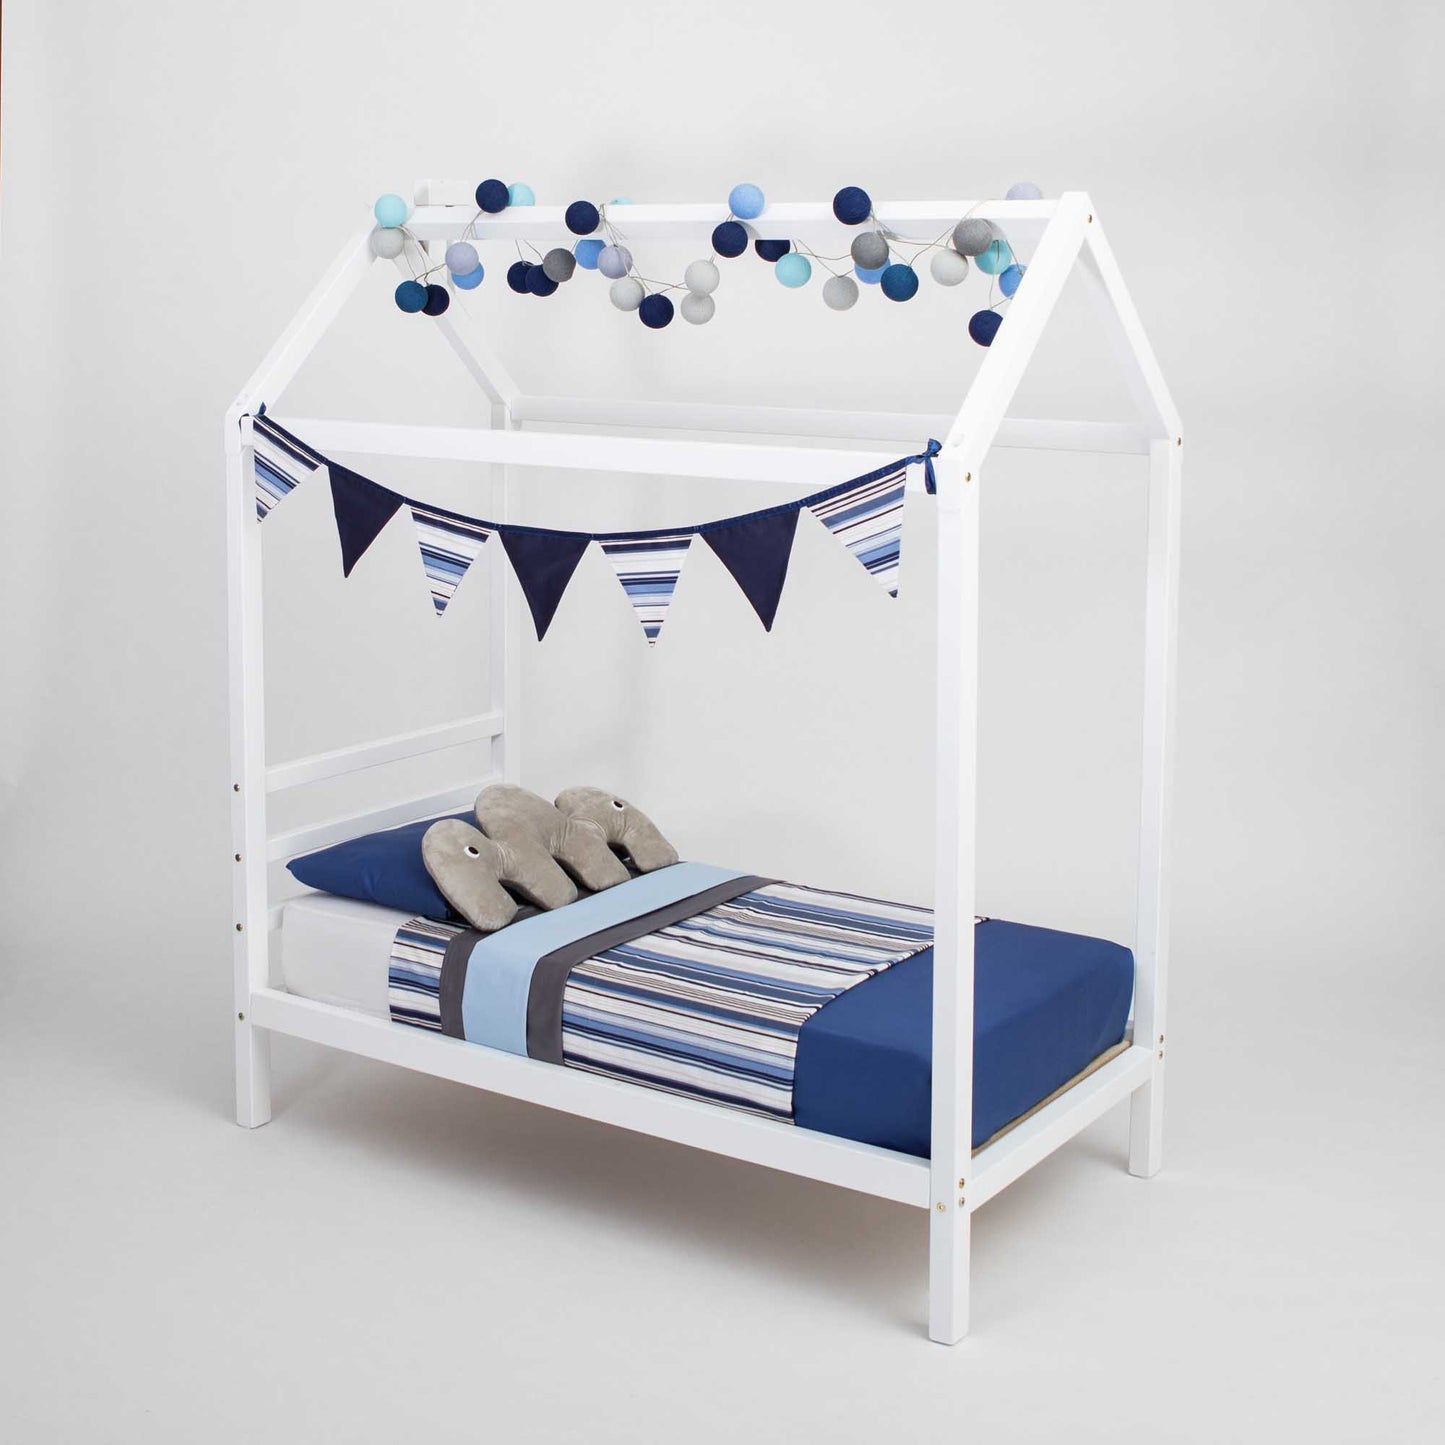 A Kids' house bed on legs with a headboard bed with blue and white stripes and bunting.